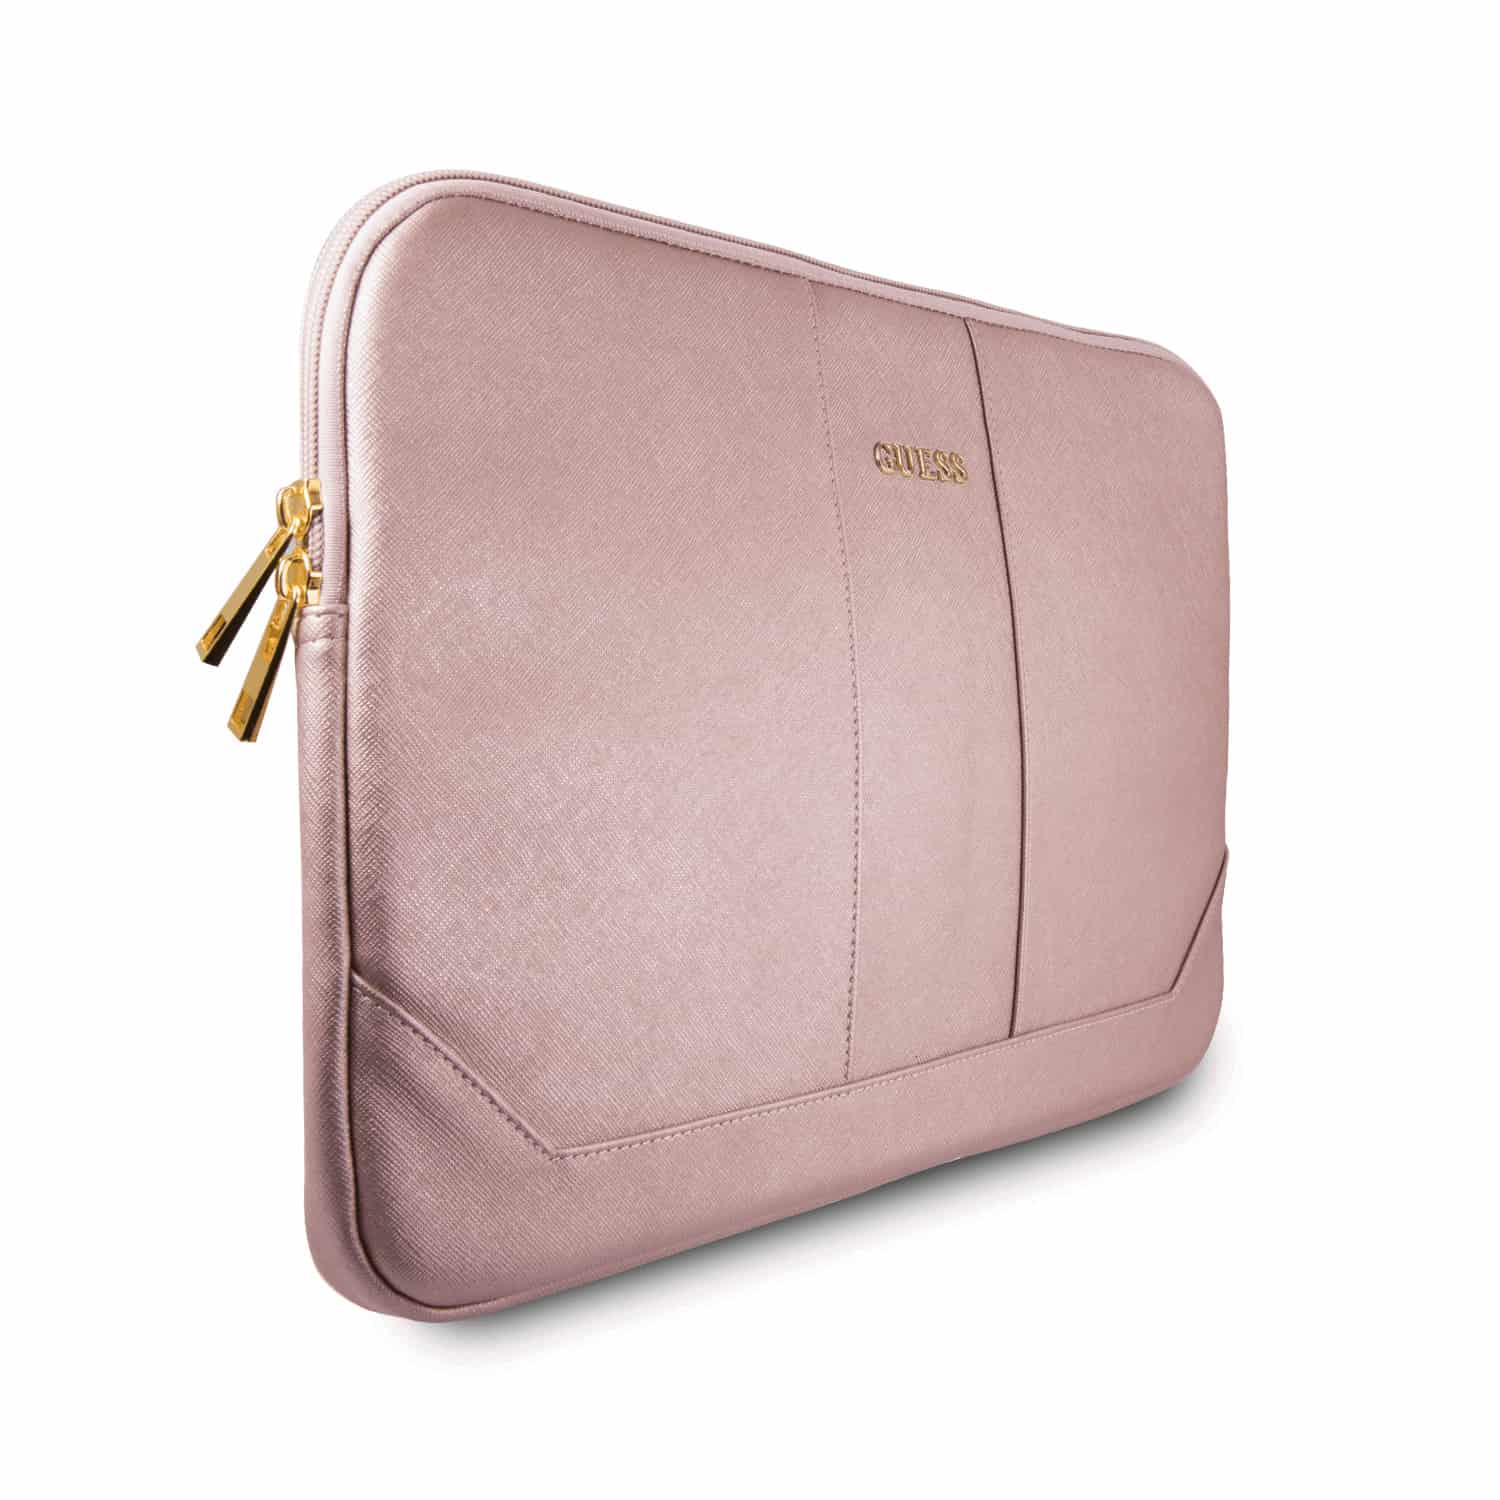 Allergisk tryk skitse Budget Cellular on Twitter: "GUESS Saffiano Computer Sleeve 13" @ R499  Colour: Pink See more: https://t.co/o13xPbHx20 Until stock lasts - E&amp;OE  (T's &amp; C's apply) Contact info: https://t.co/2Fu1Dig5Lu FREE DELIVERY!  #budgetcellular #smartphone #